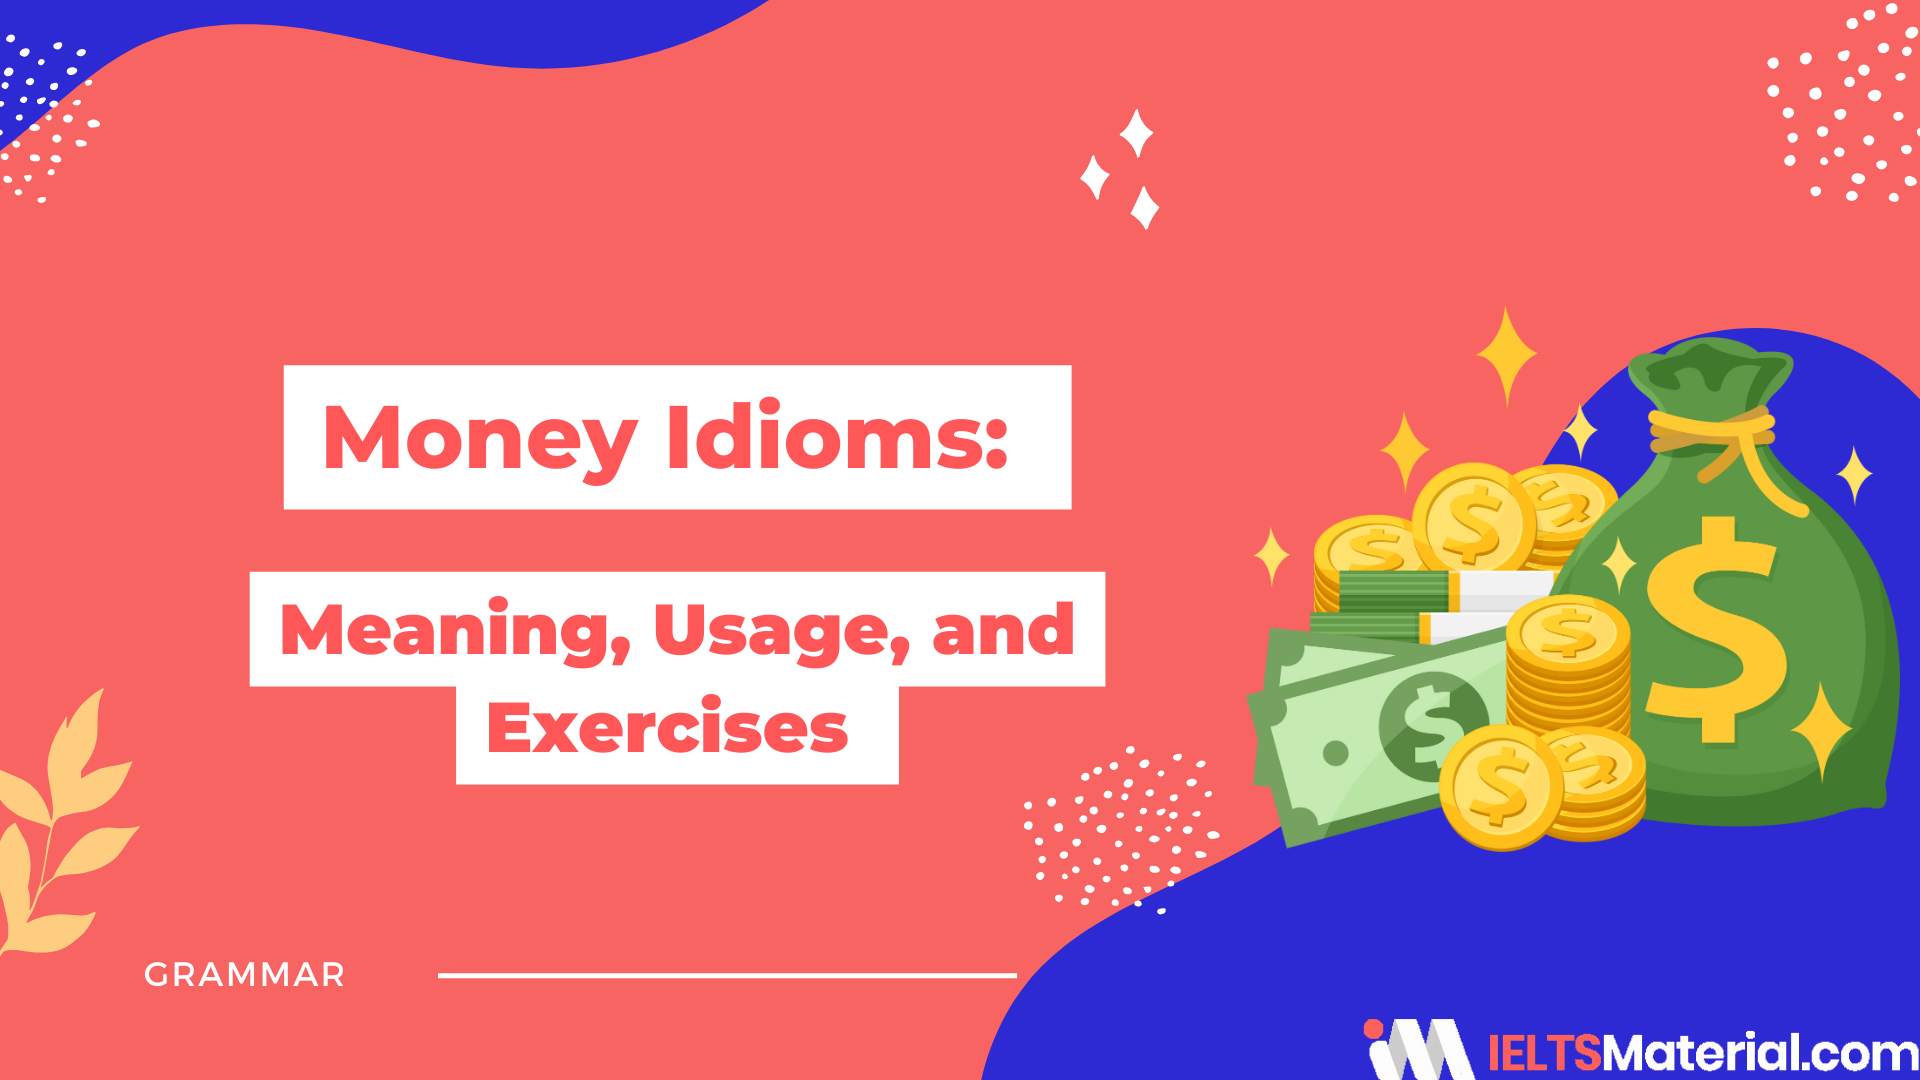 Money Idioms: Meaning, Usage, and Exercise!